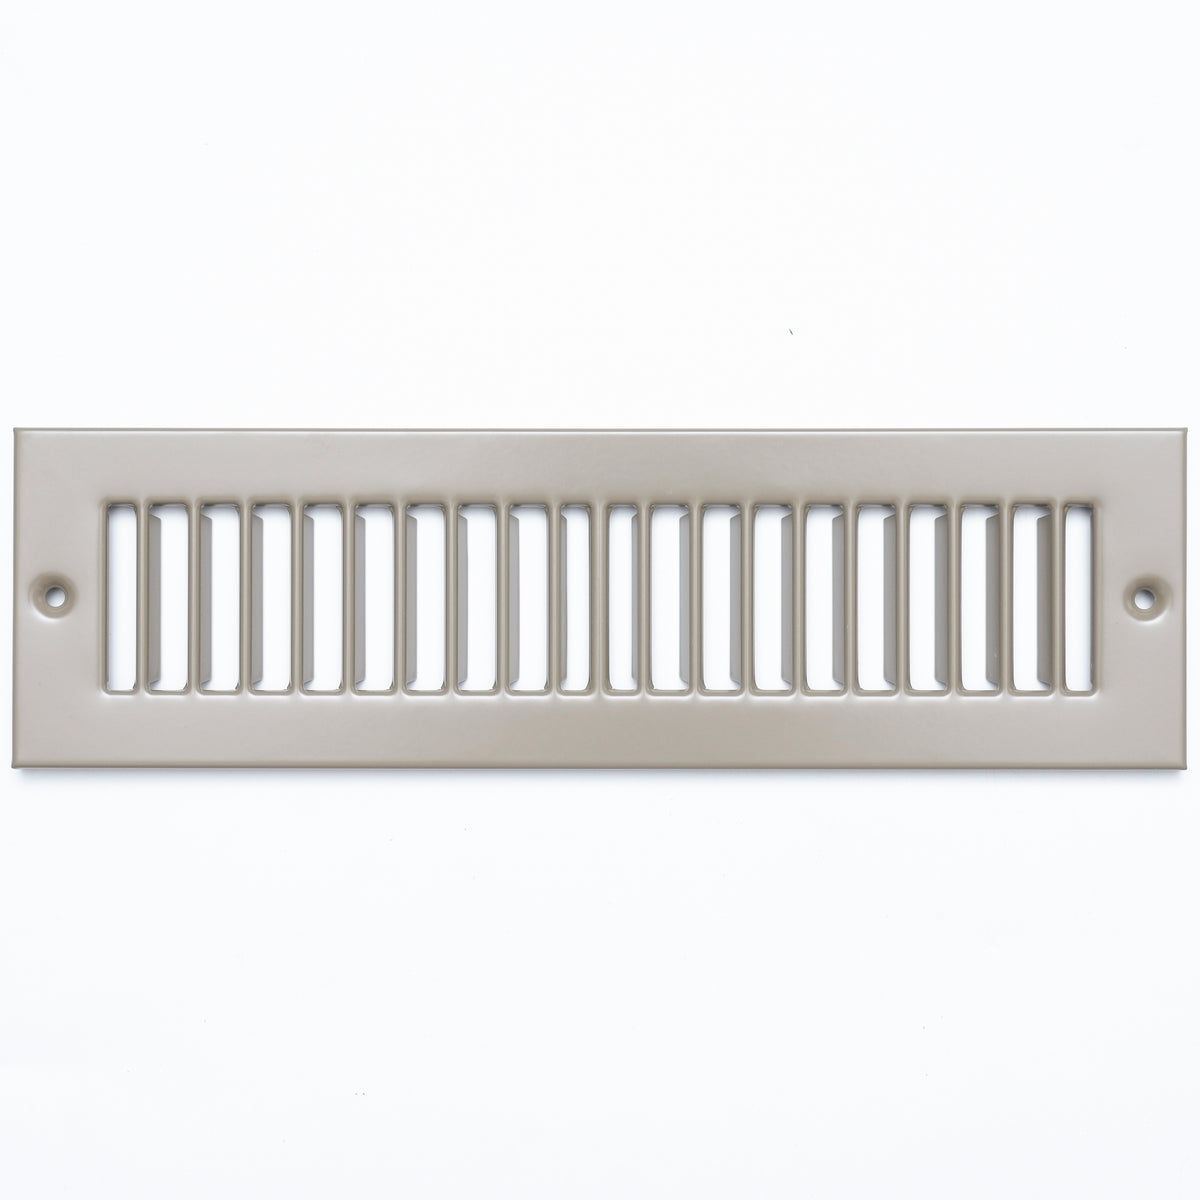 airgrilles 2" x 10" floor register with louvered design   heavy duty walkable design with damper   floor vent grille   easy to adjust air supply lever   gray hnd-flg-gr-2x10  - 1